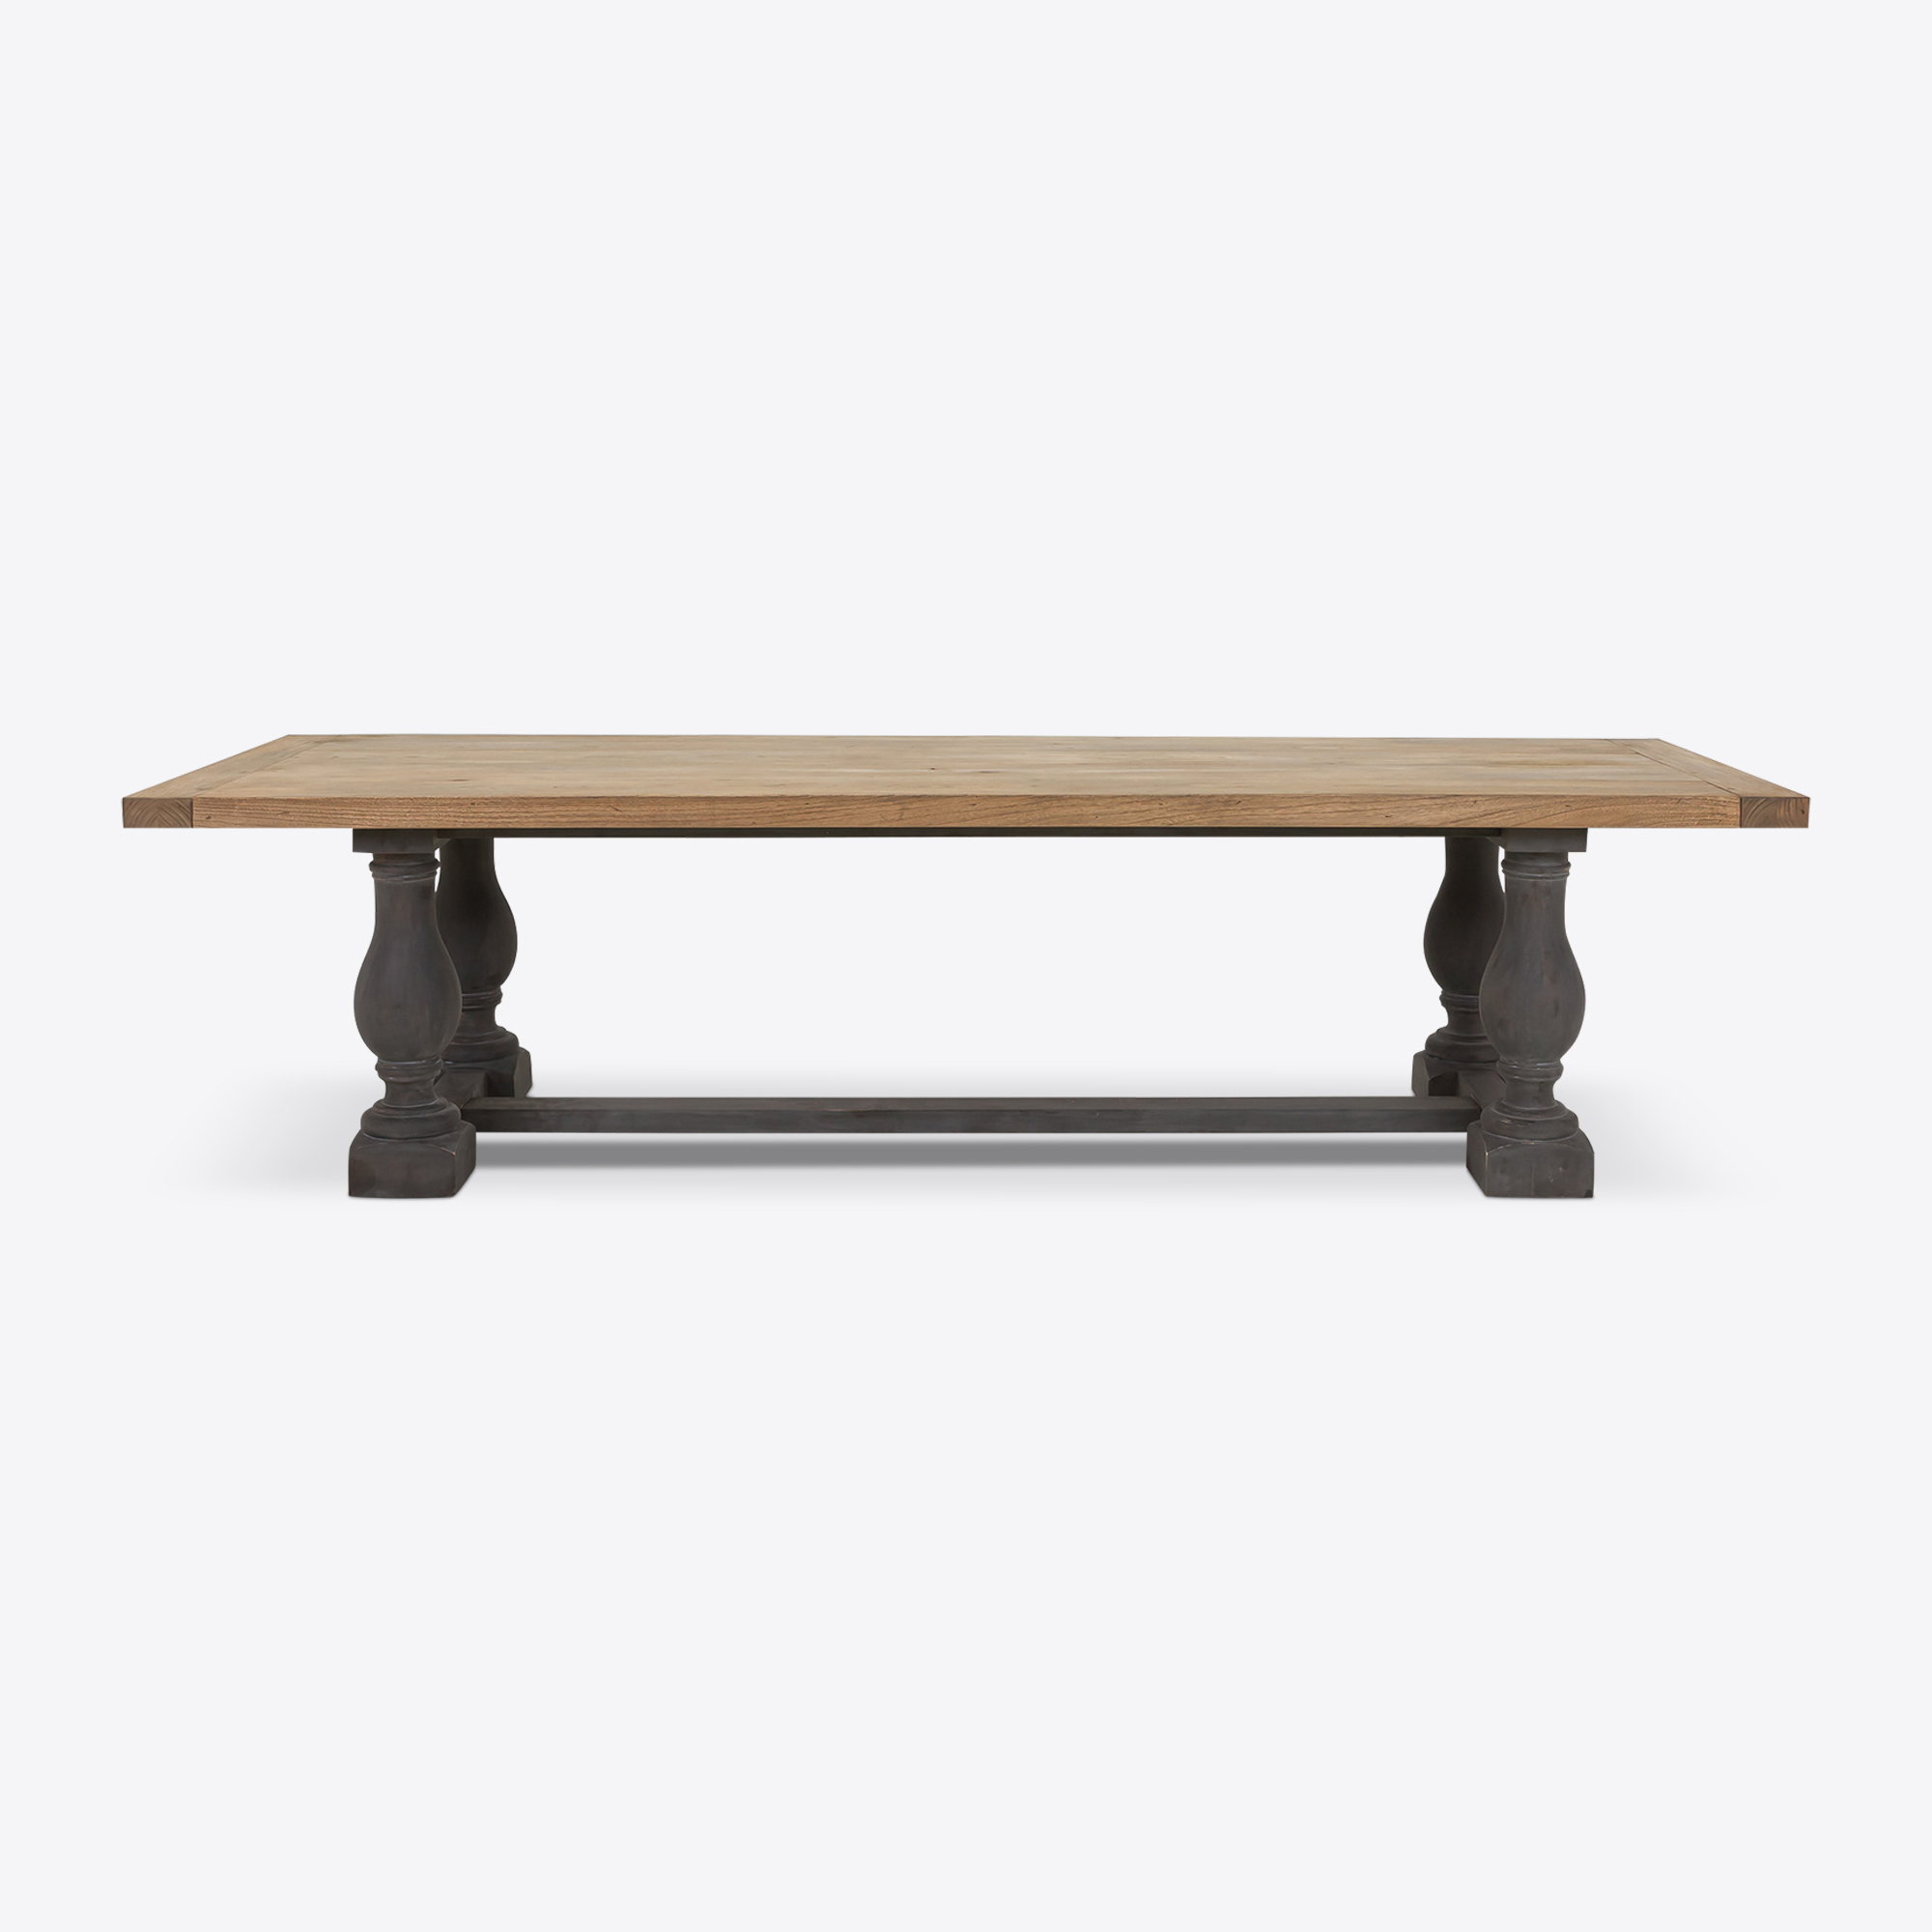 Cotswolds refectory dining table 300cm long rectangular farmhouse